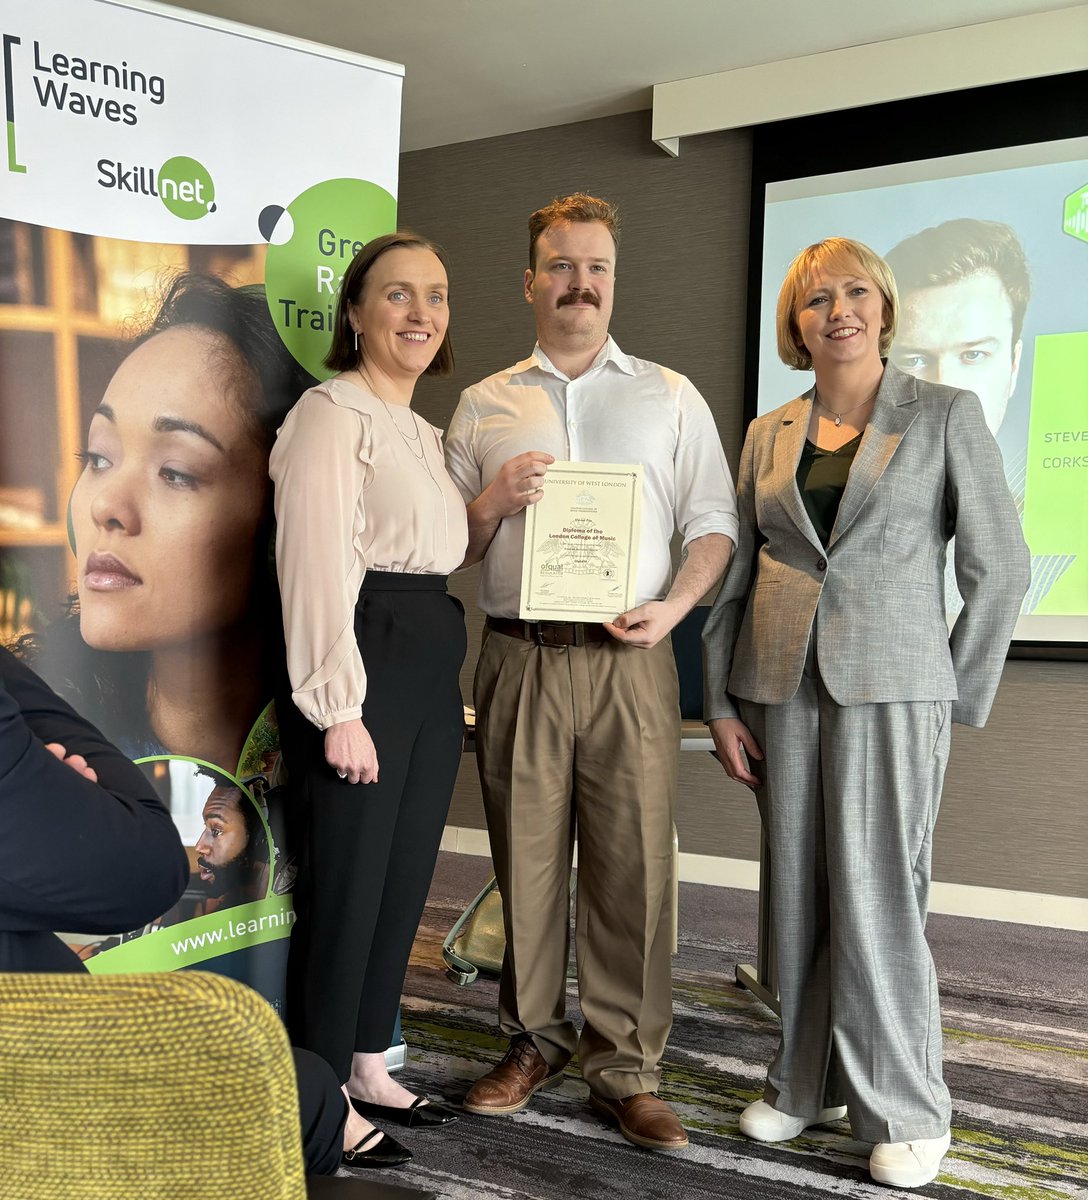 Congratulations to Steven Fox who did his placement as part of the @LearningWaves Journalism Graduate programme at @Corks96FM and @C103Cork on receiving his diploma today from @LearningWaves Chair @patriciamonahan and @SineadCrowley from @CNaM_ie